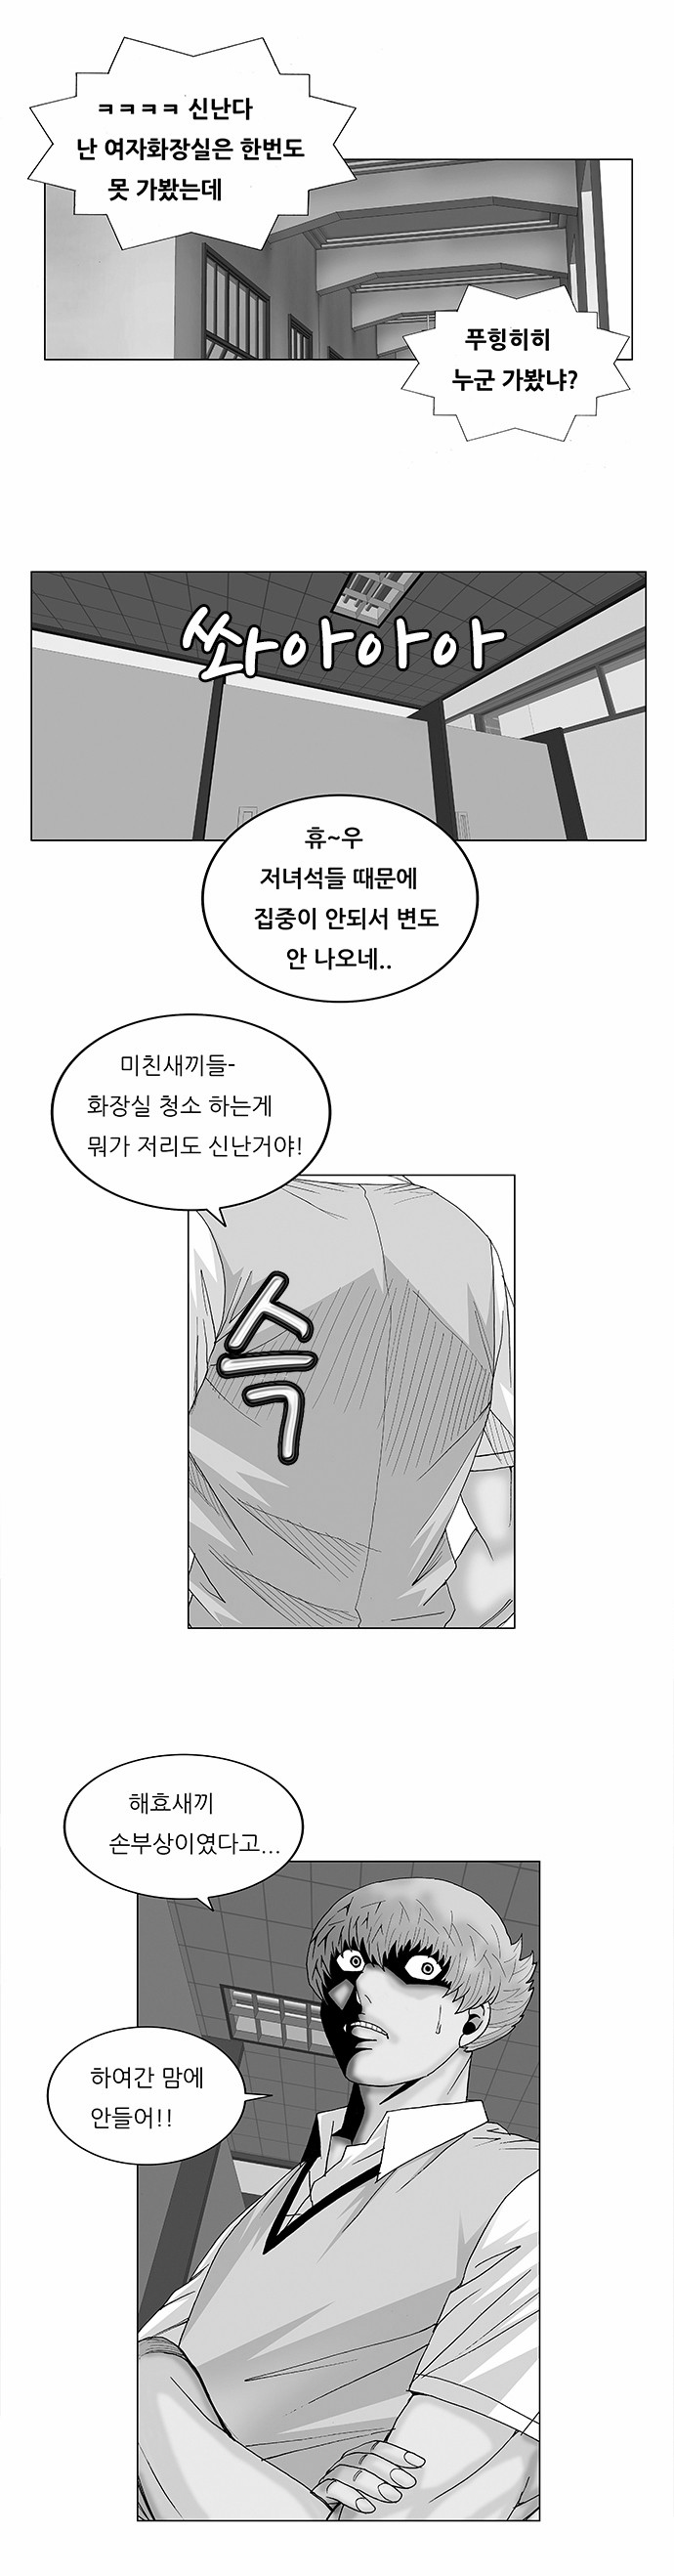 Ultimate Legend - Kang Hae Hyo - Chapter 98 - Page 1